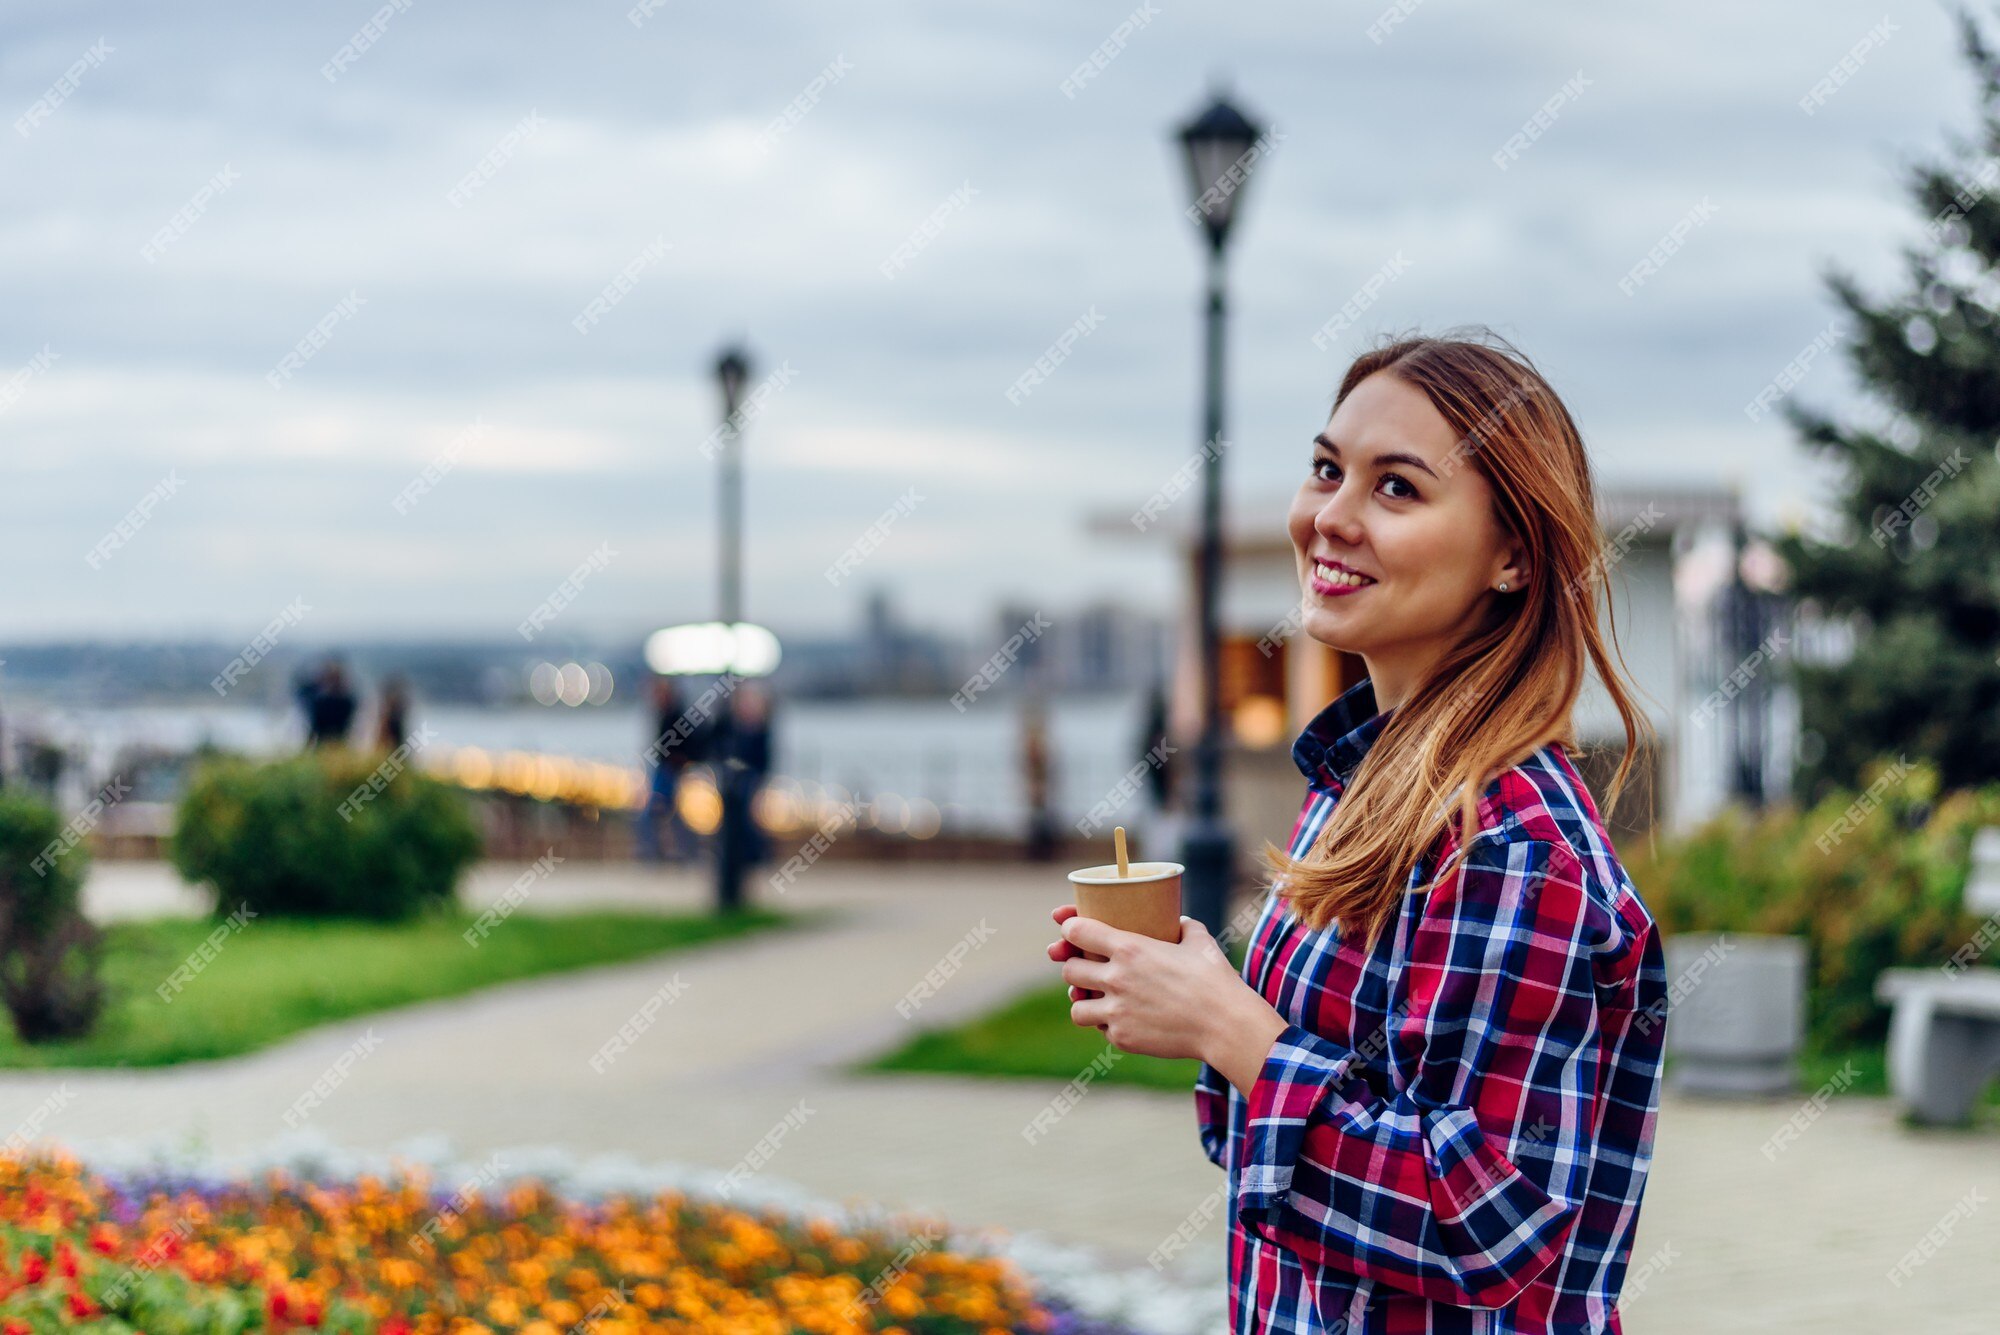 Coffee On The Go. Beautiful Young Woman Holding Coffee Cup And